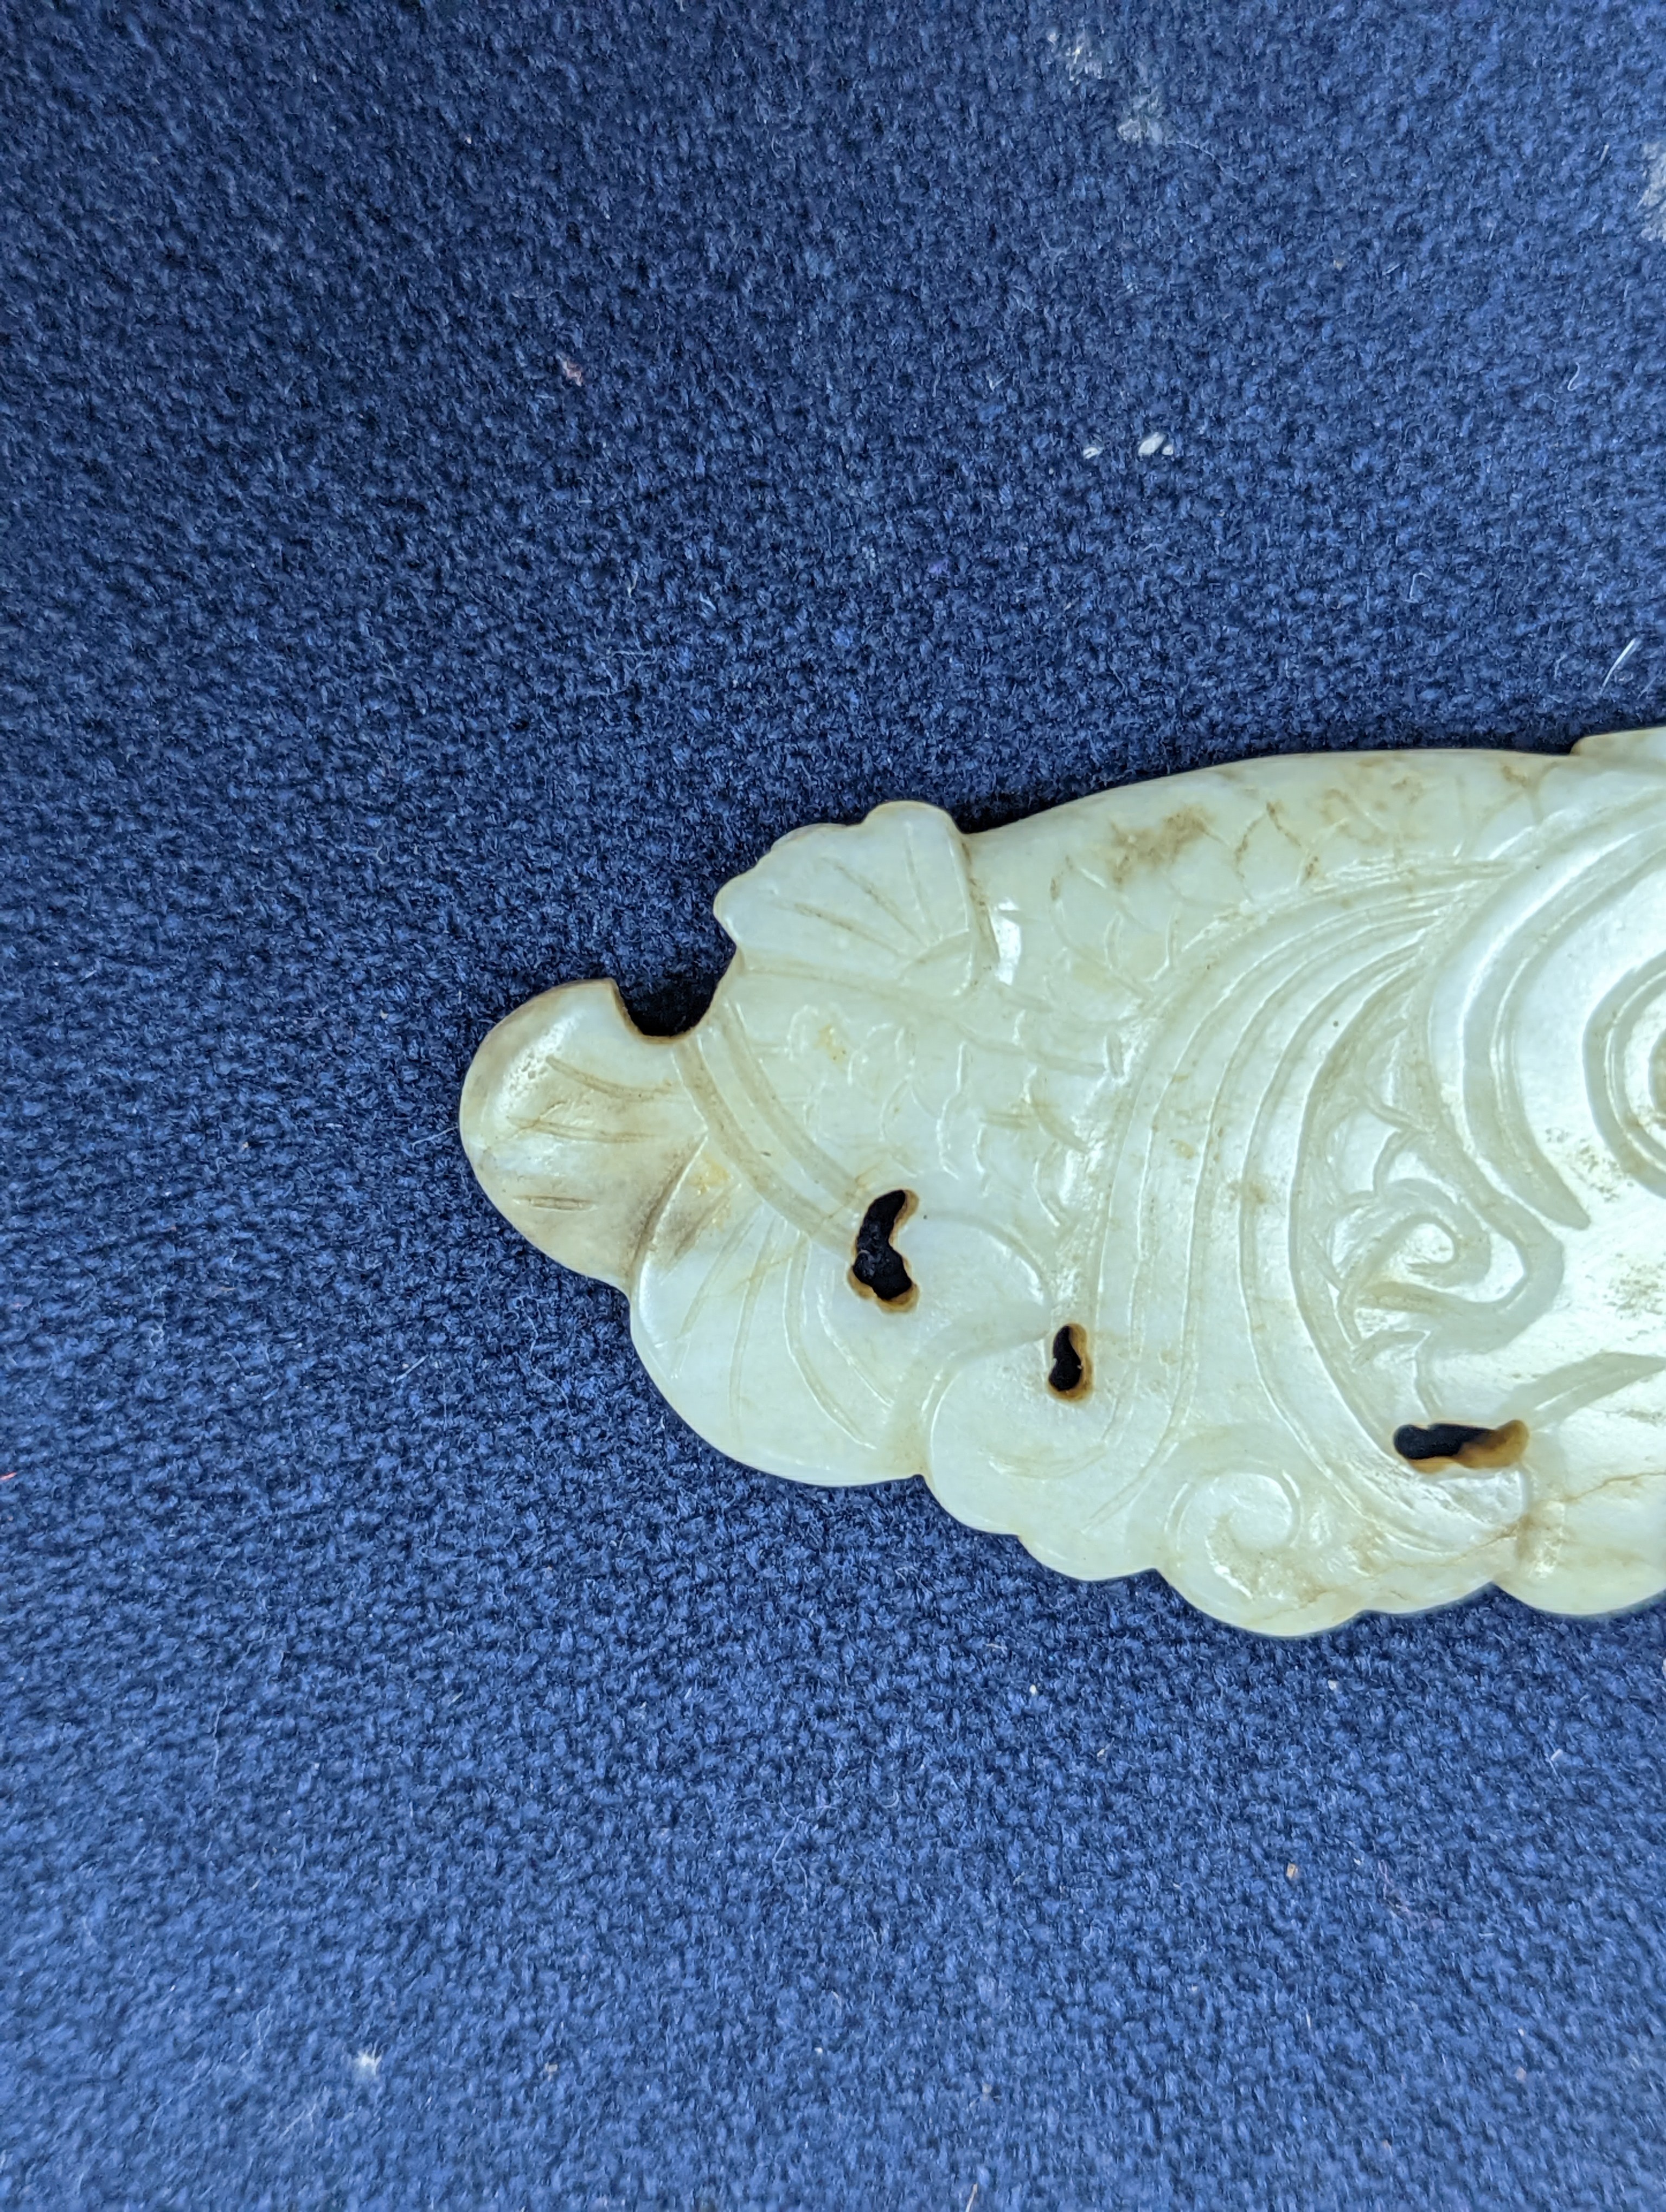 A Chinese white and black jade ‘dragon-fish’ plaque, 19th/20th century, 6cm